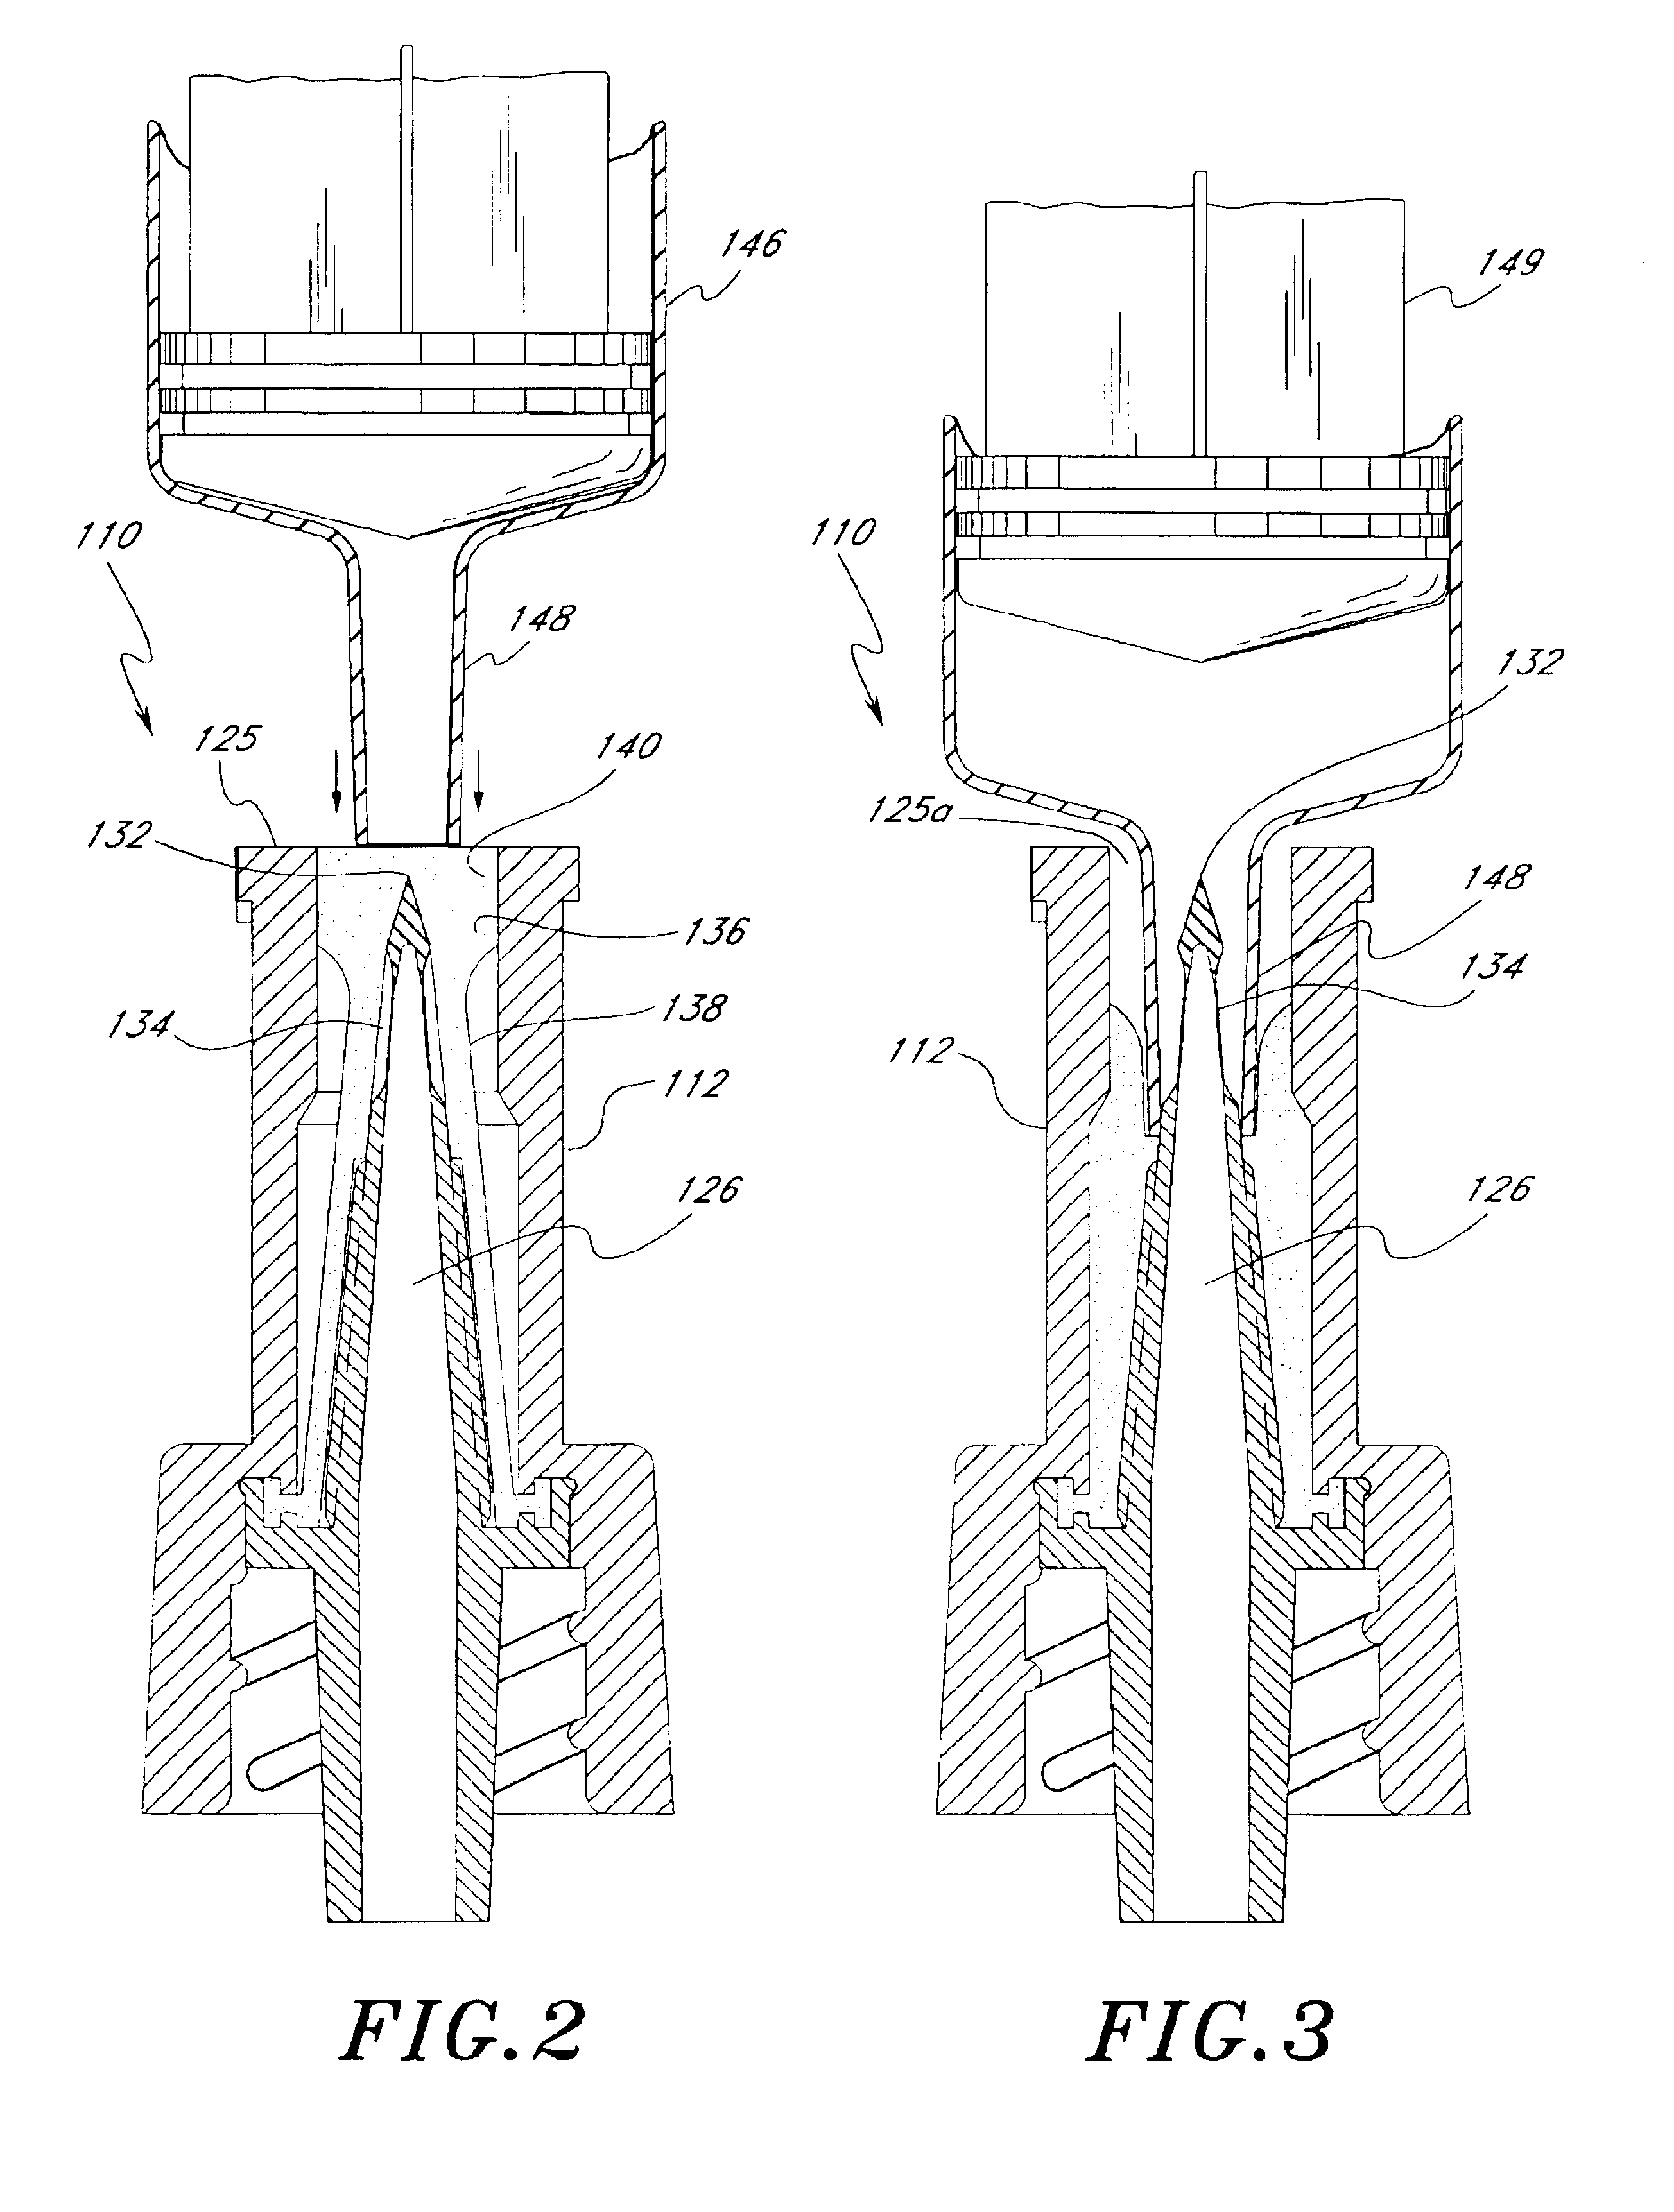 Urinary catheter system with a releasable connector